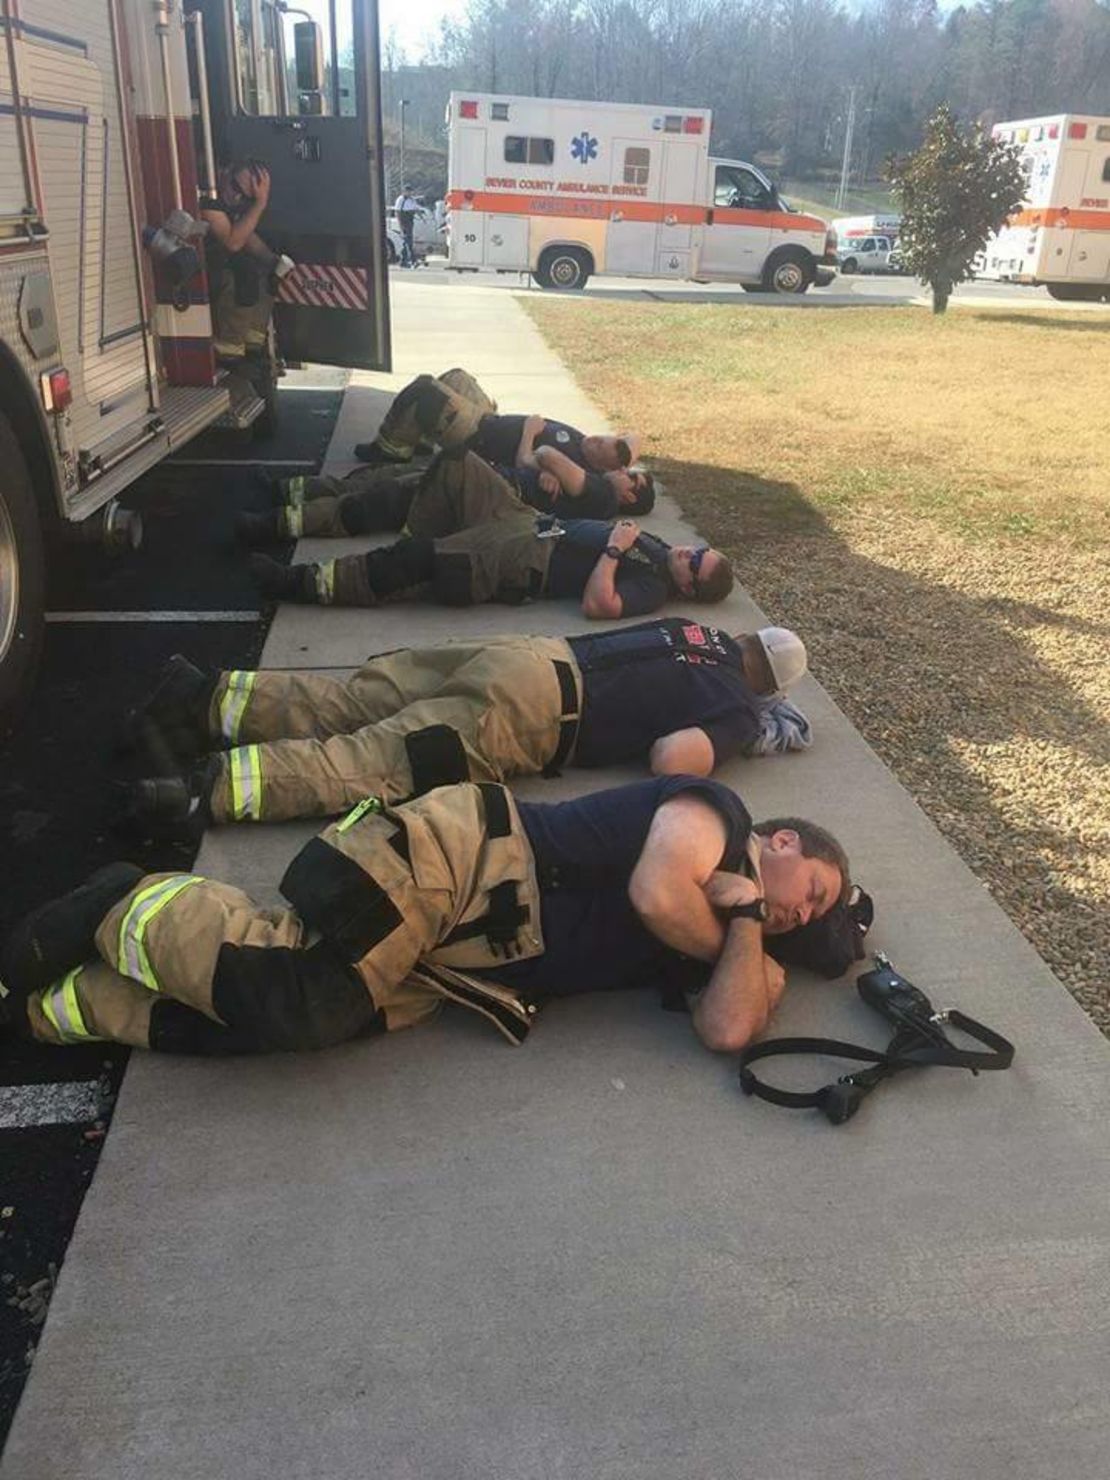 Firefighters from the Johnson City Professional Firefighters Association L-1791 rest after 36 hours of battling the fires around Gatlinburg, TN